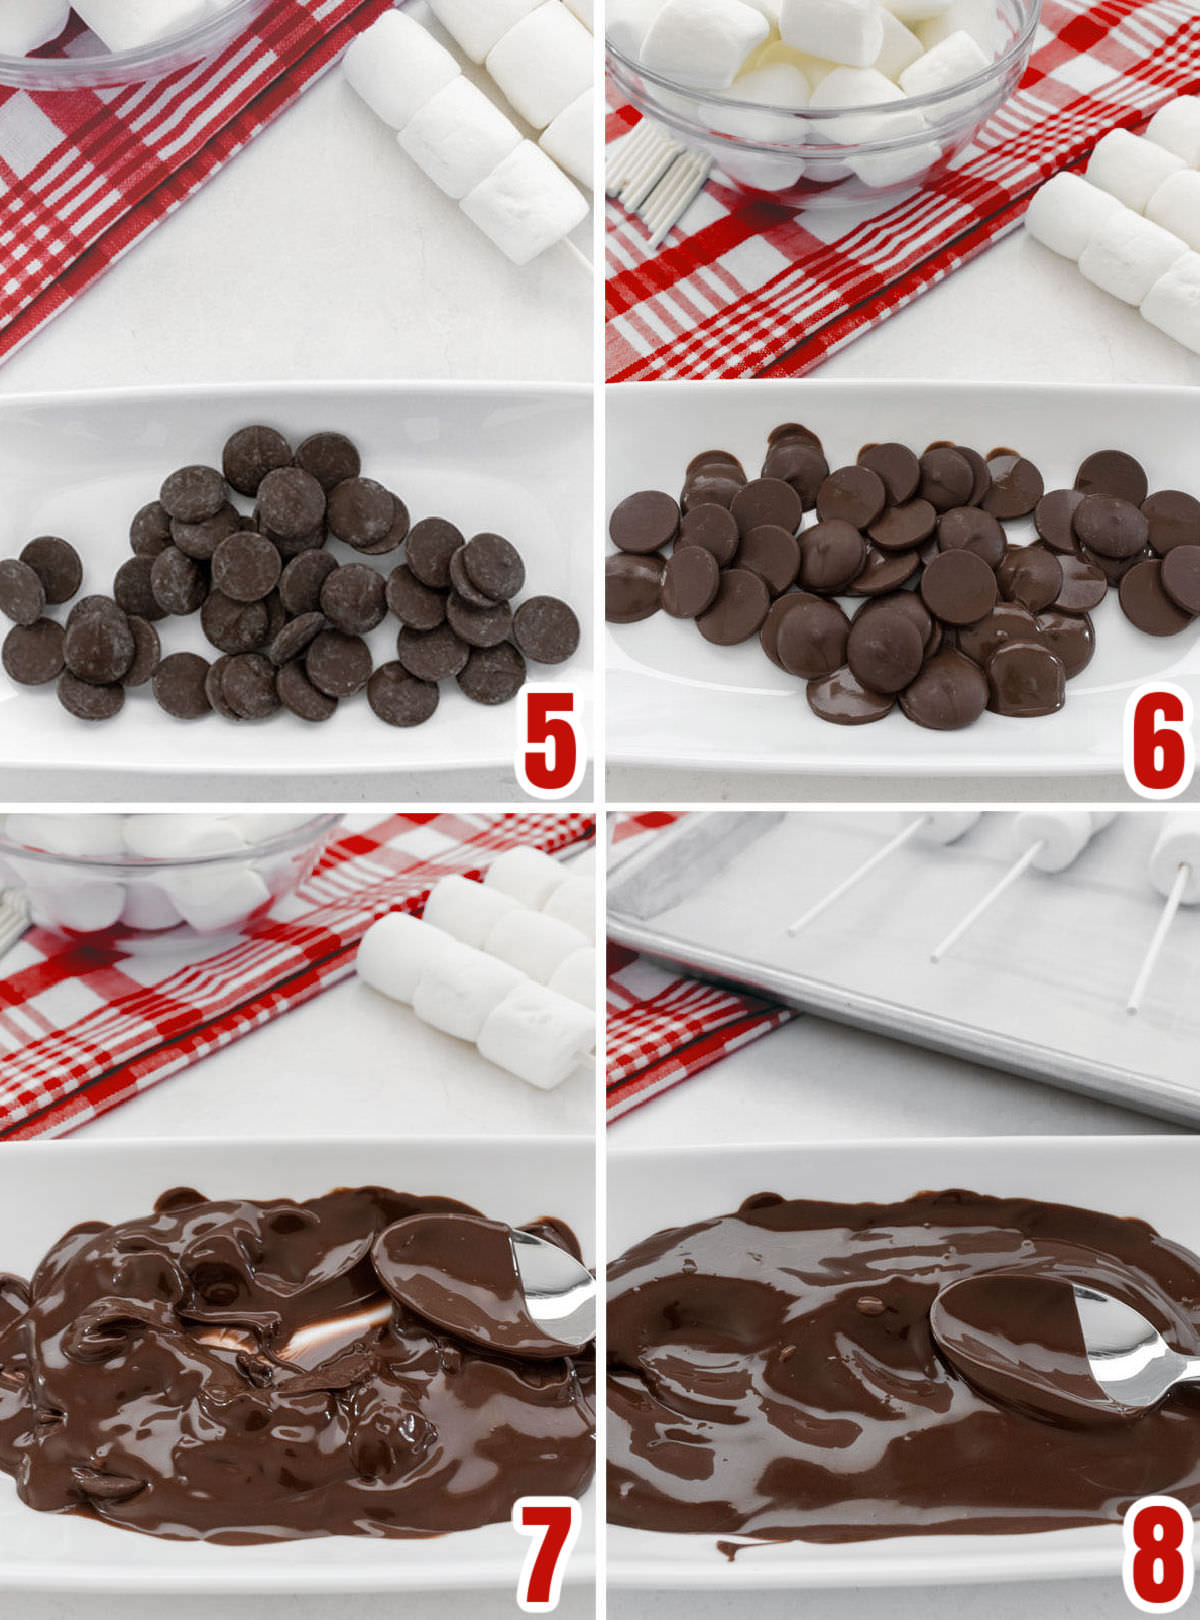 Collage image showing how to prepare the chocolate to coat the marshmallow pops.